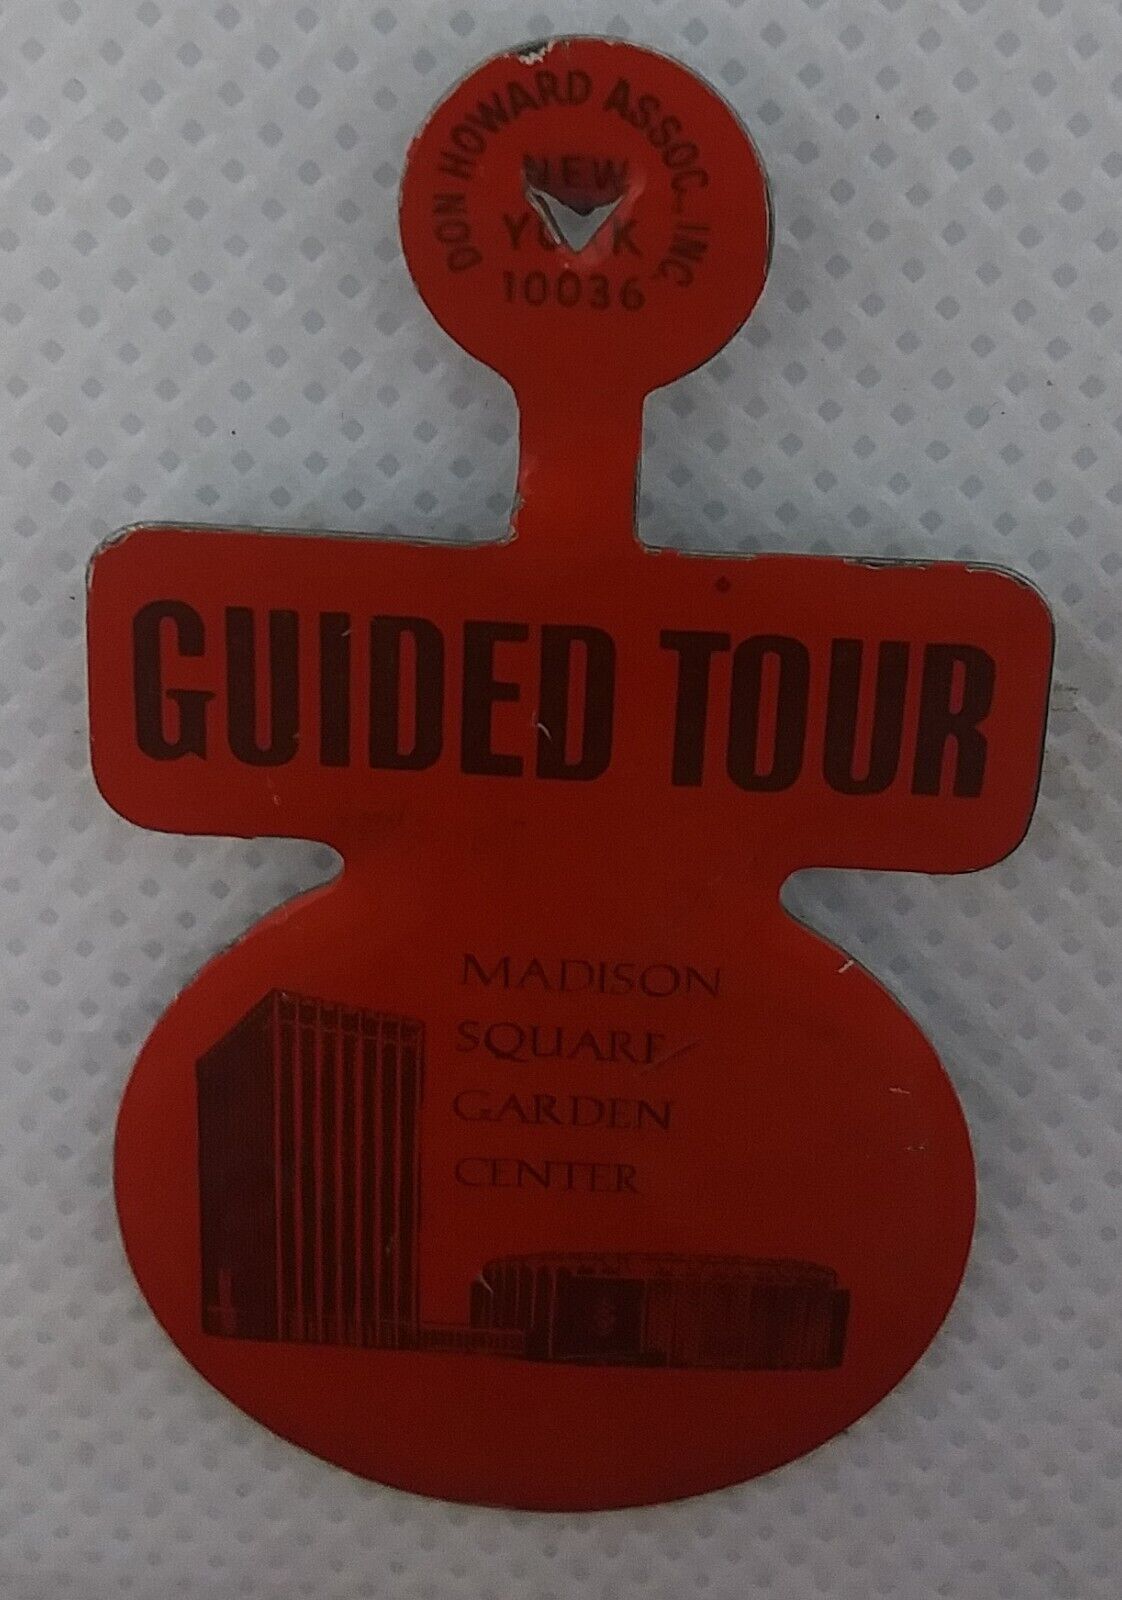 Vintage Guided Tour Madison Square Garden Center Fold Tab Button